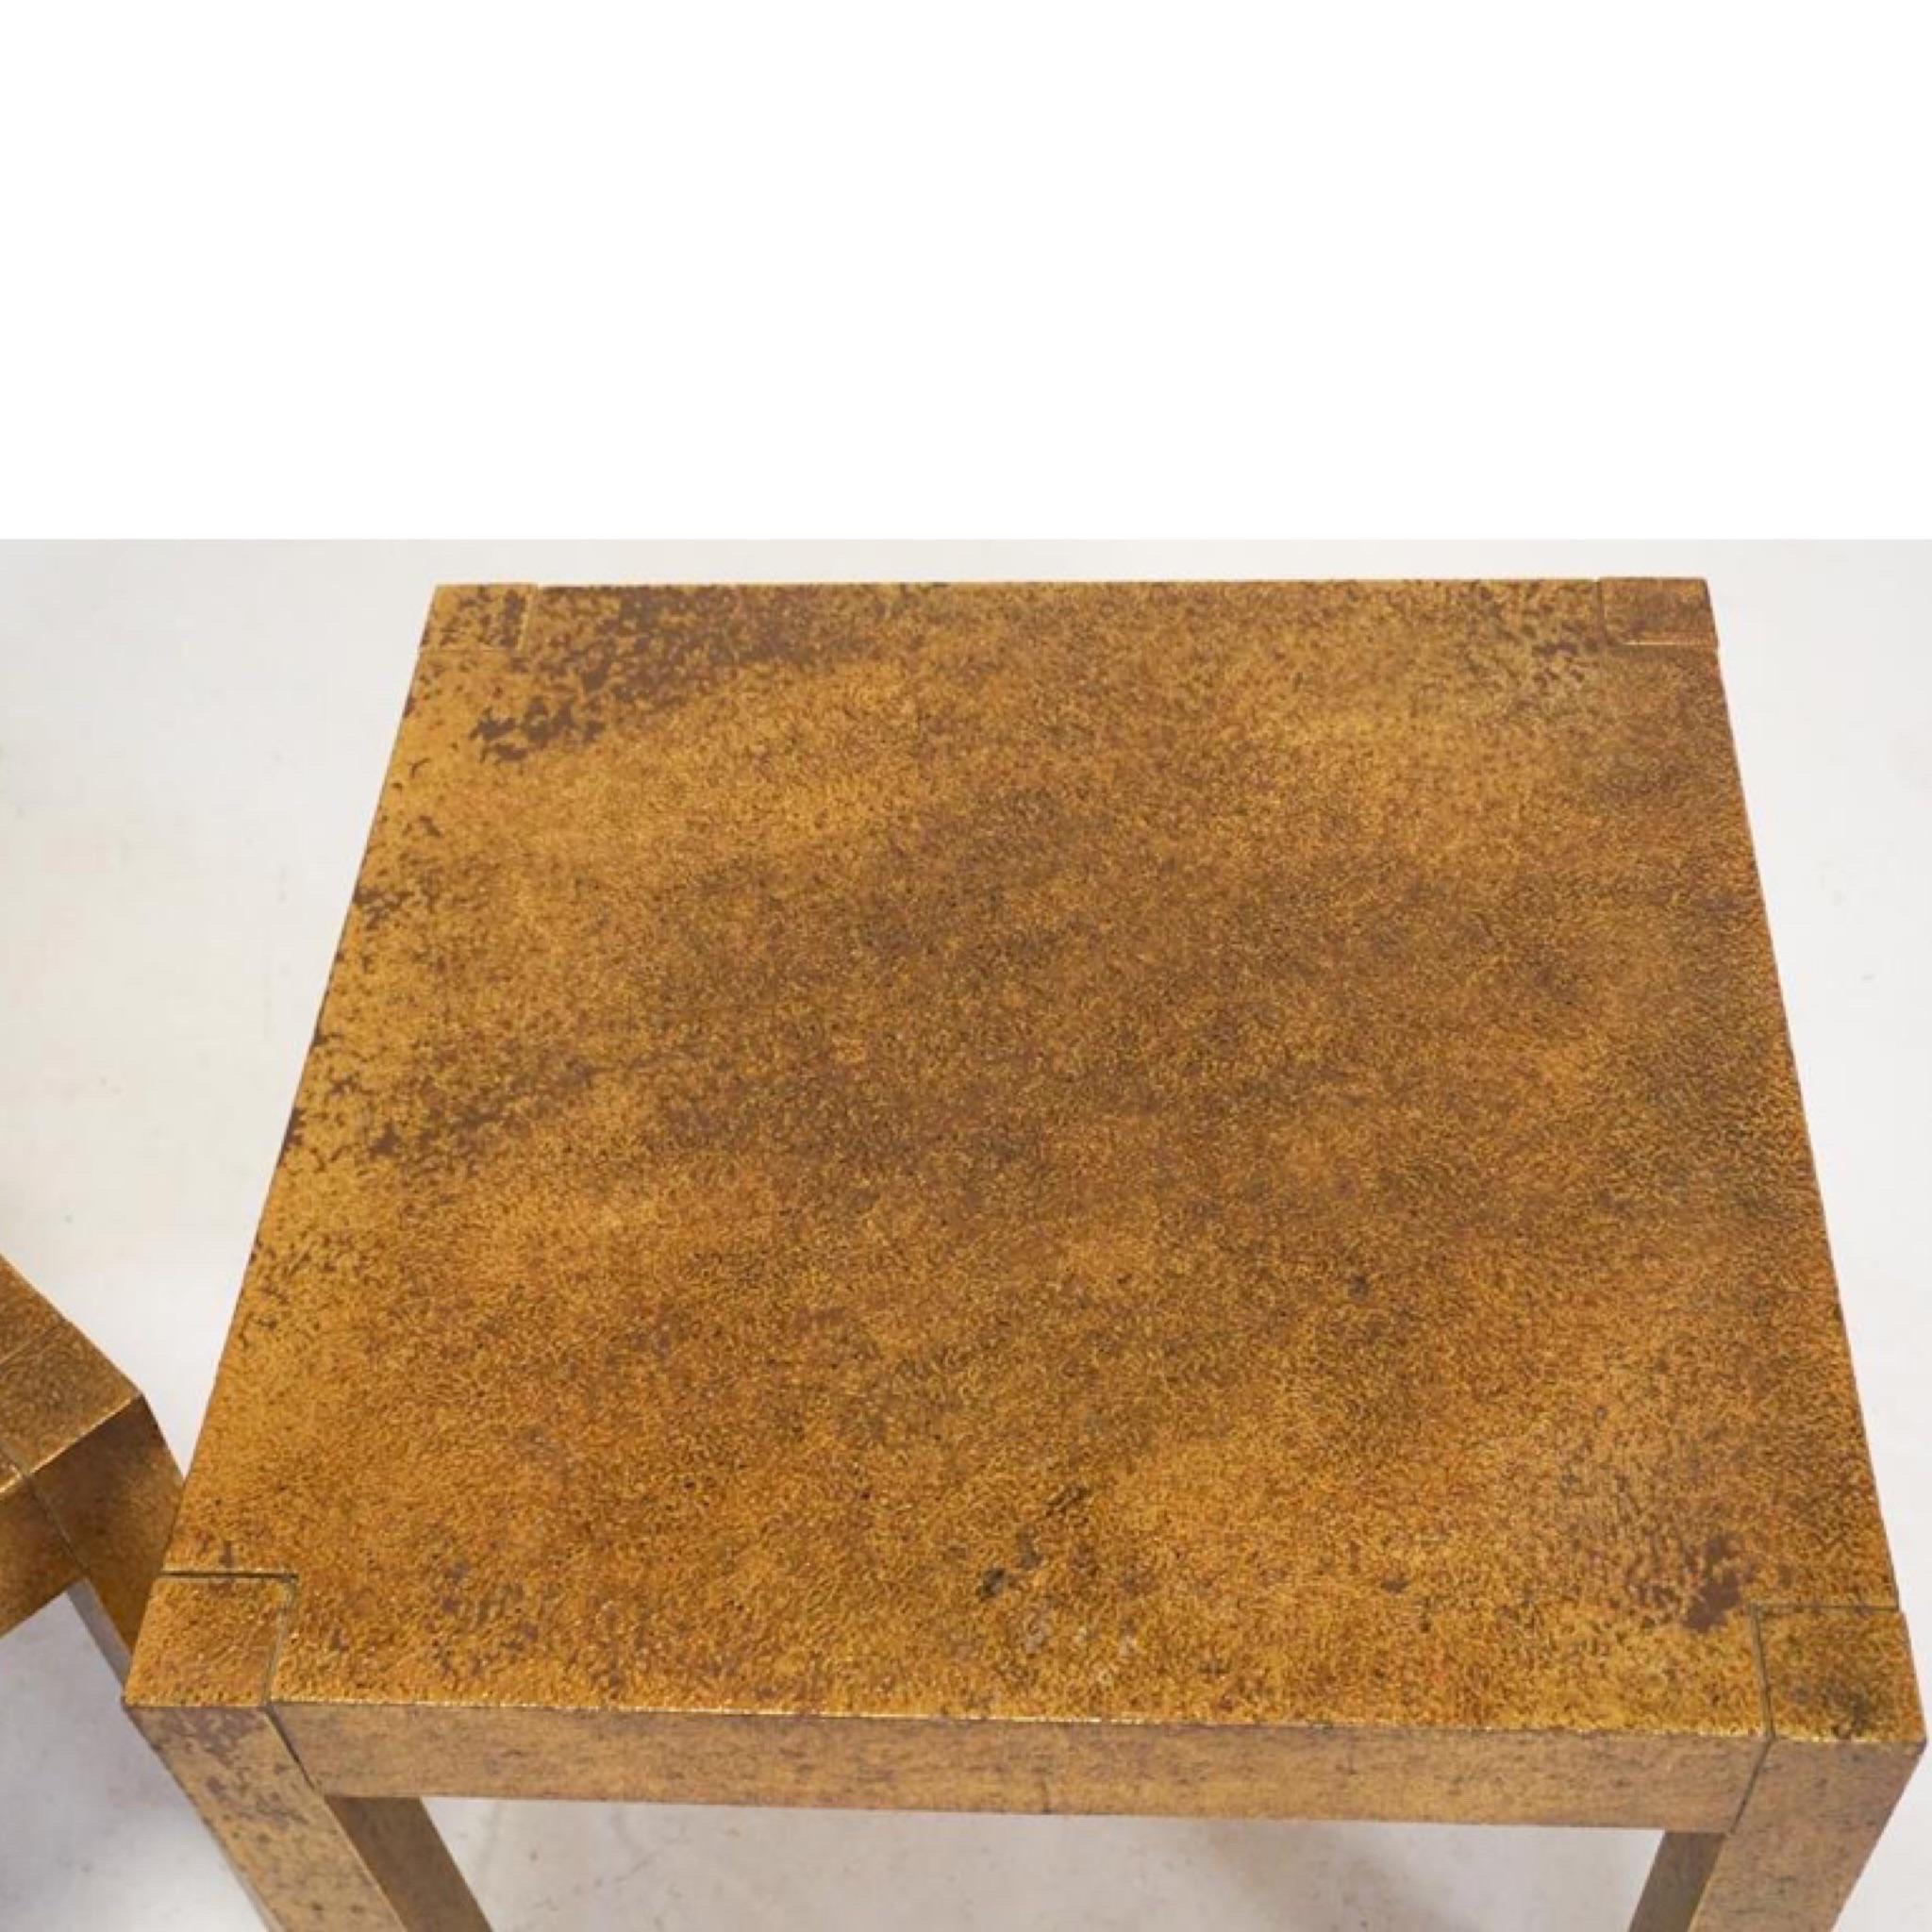 A fantastic pair of square parsons style side tables have a textured gold finish and are from Drexel’s Et Cetera line. Mid 20th century. Pair having a very nice gold gilt surface with tones of bronze. Nice original surface with some slight wear